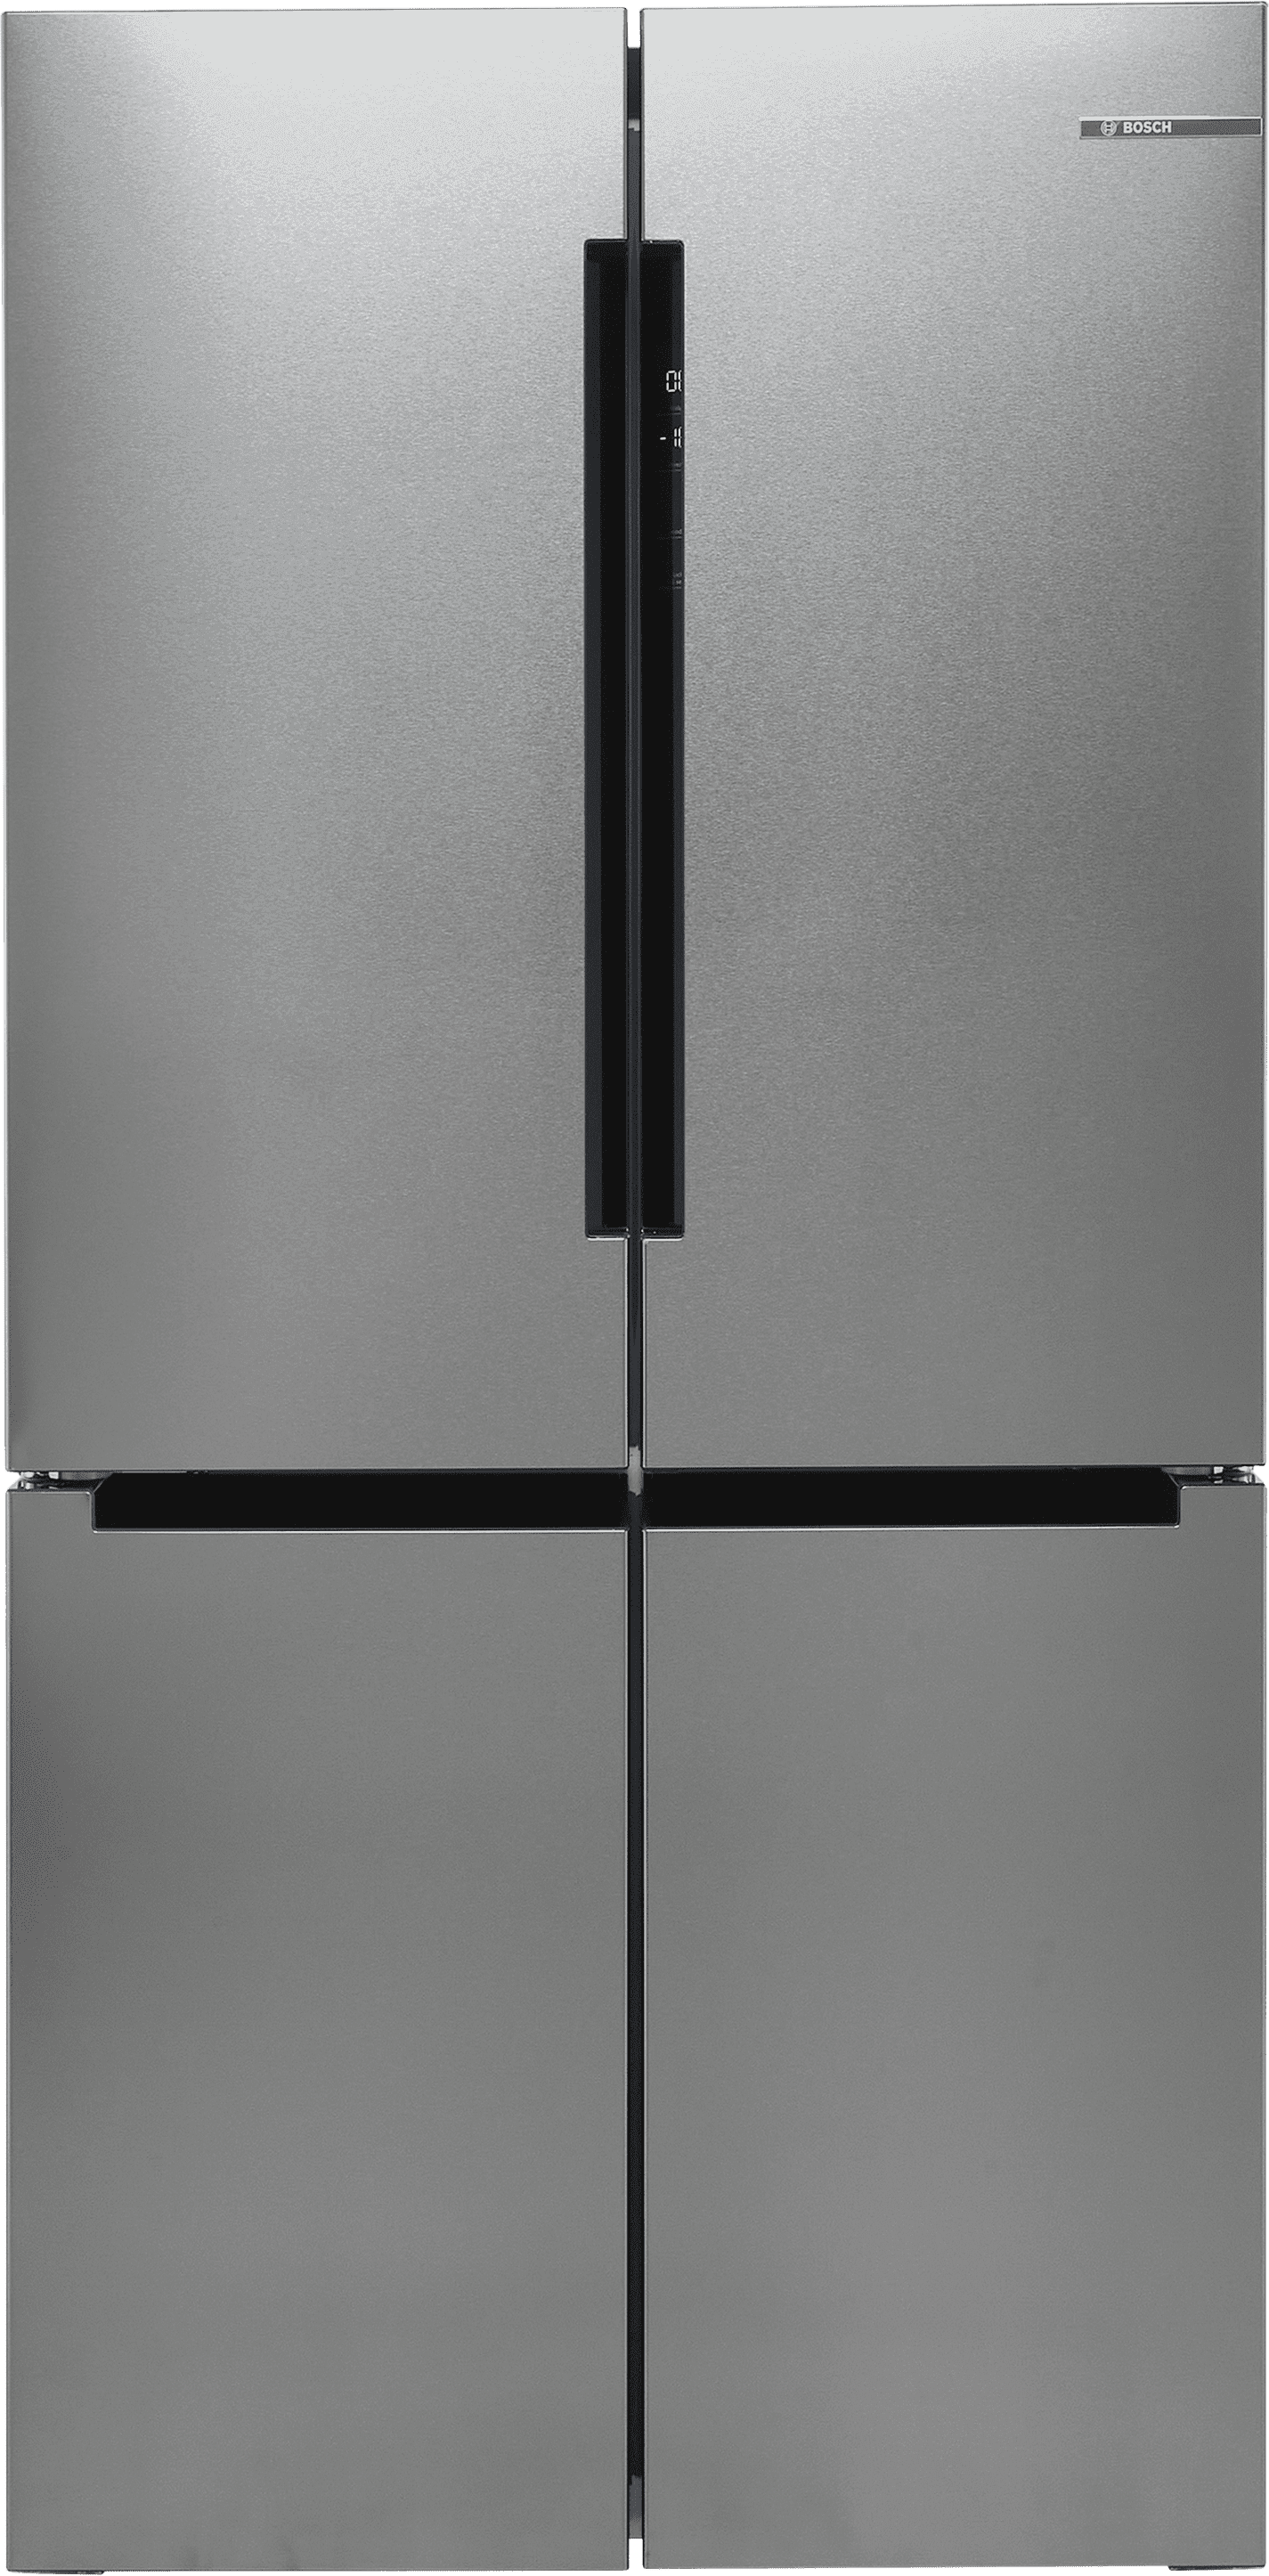 Bosch Series 4 KFN96APEAG Frost Free American Fridge Freezer - Stainless Steel Effect - E Rated, Stainless Steel